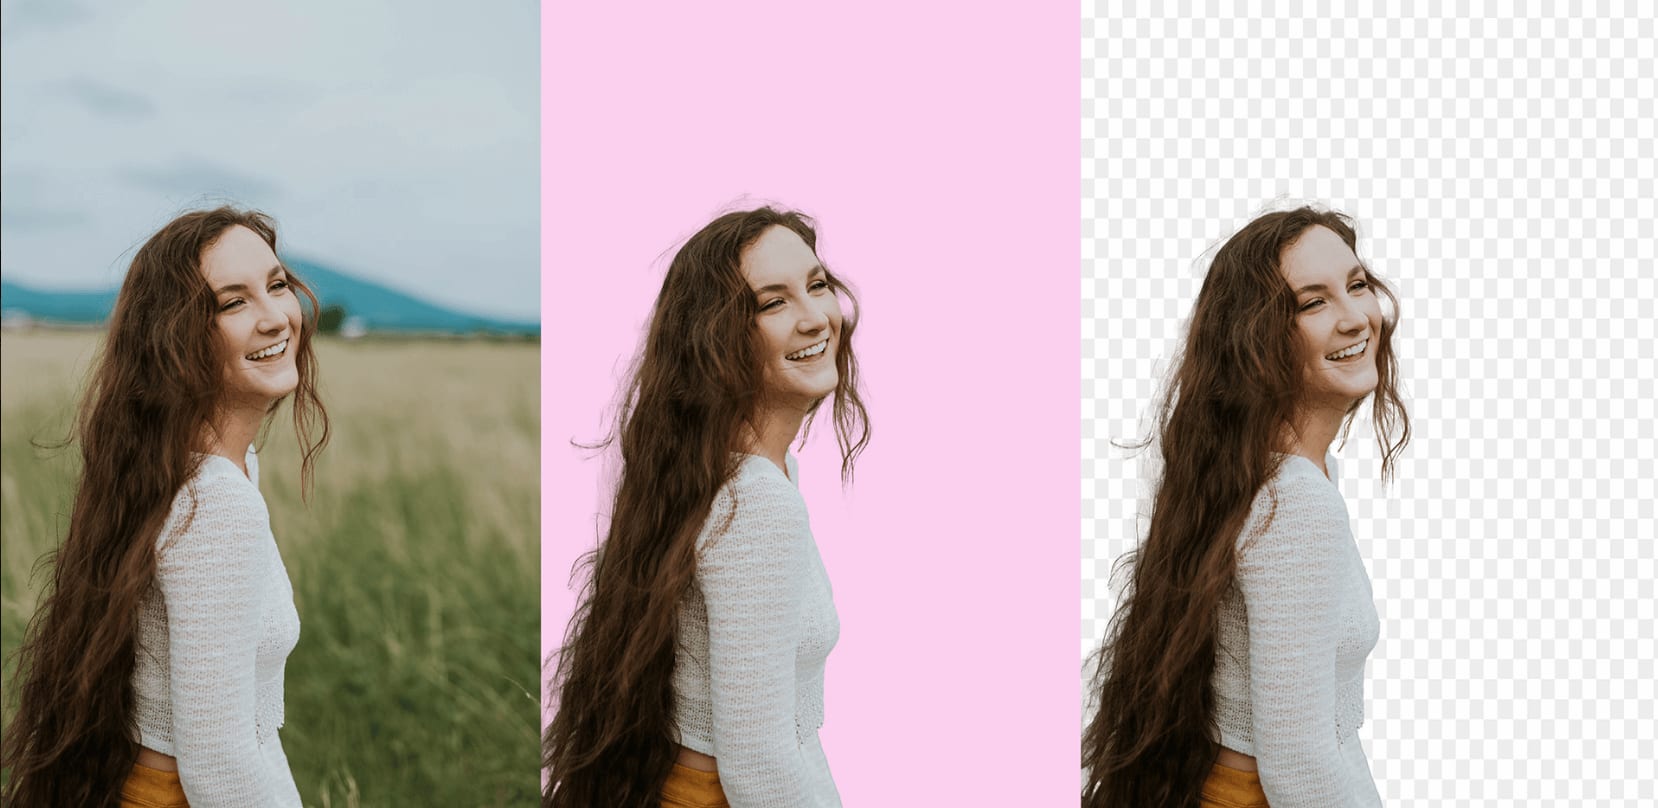 Clipping Path Service and Background Remove 5